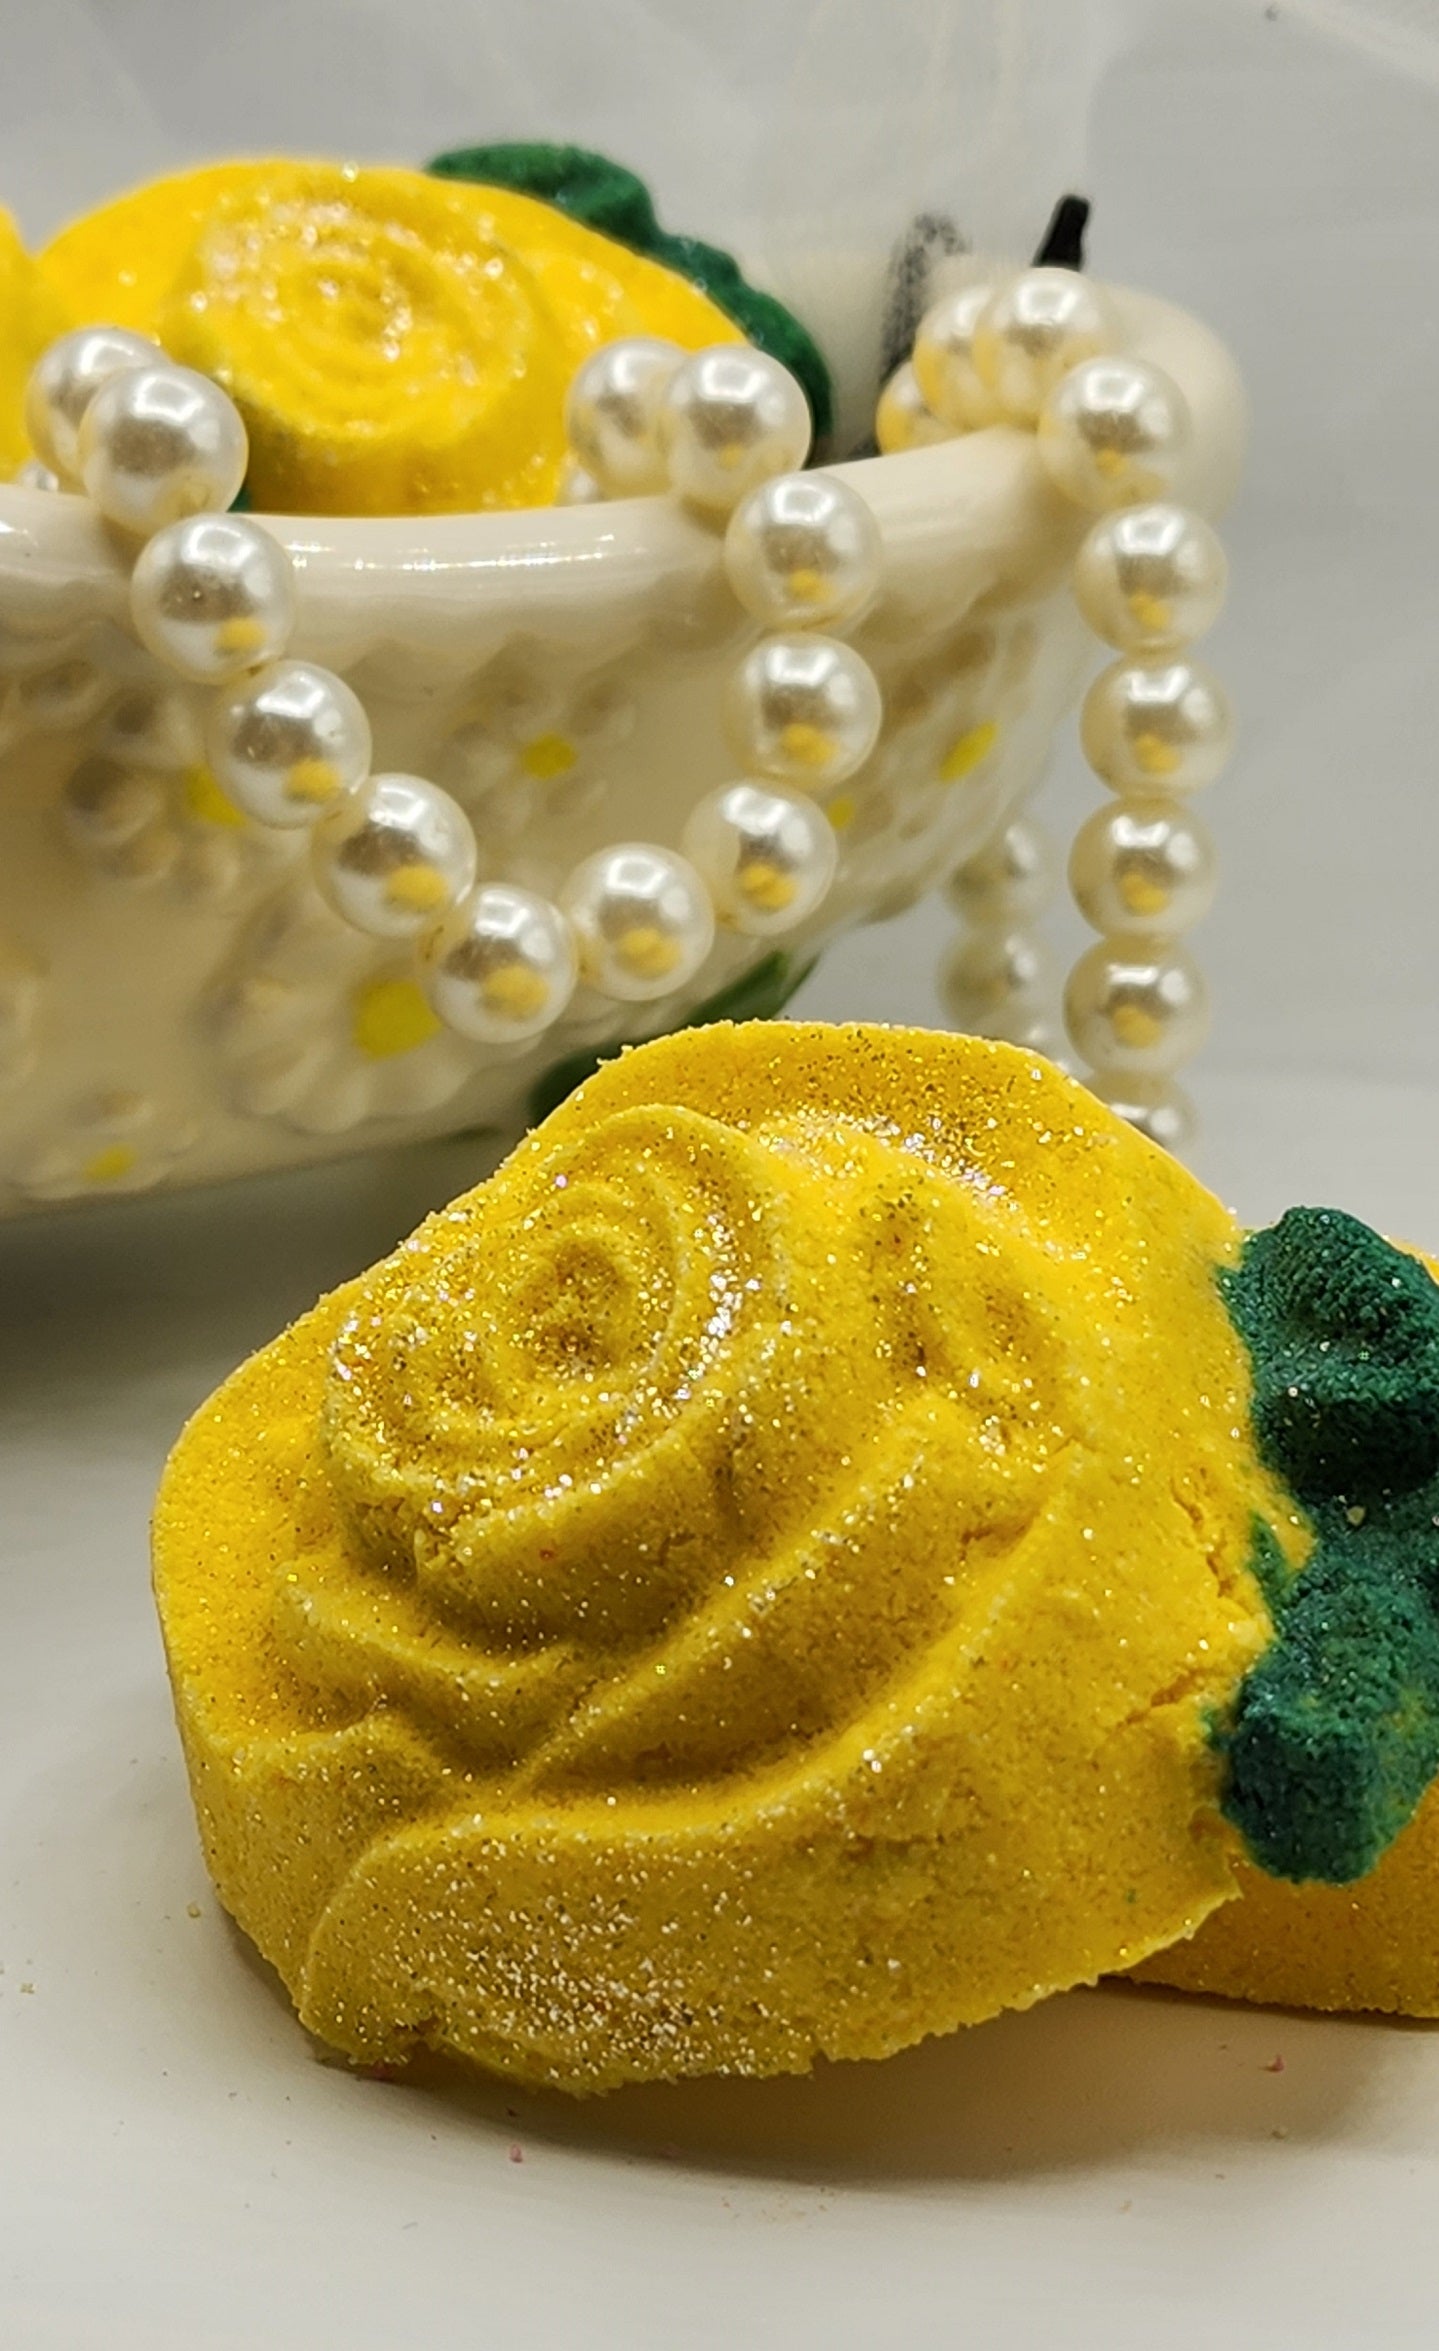 HONEYSUCKLE Bath Bomb / Spa Scented Bath Bomb / BATH BOMBS / ROSE SHAPED Mother's Day